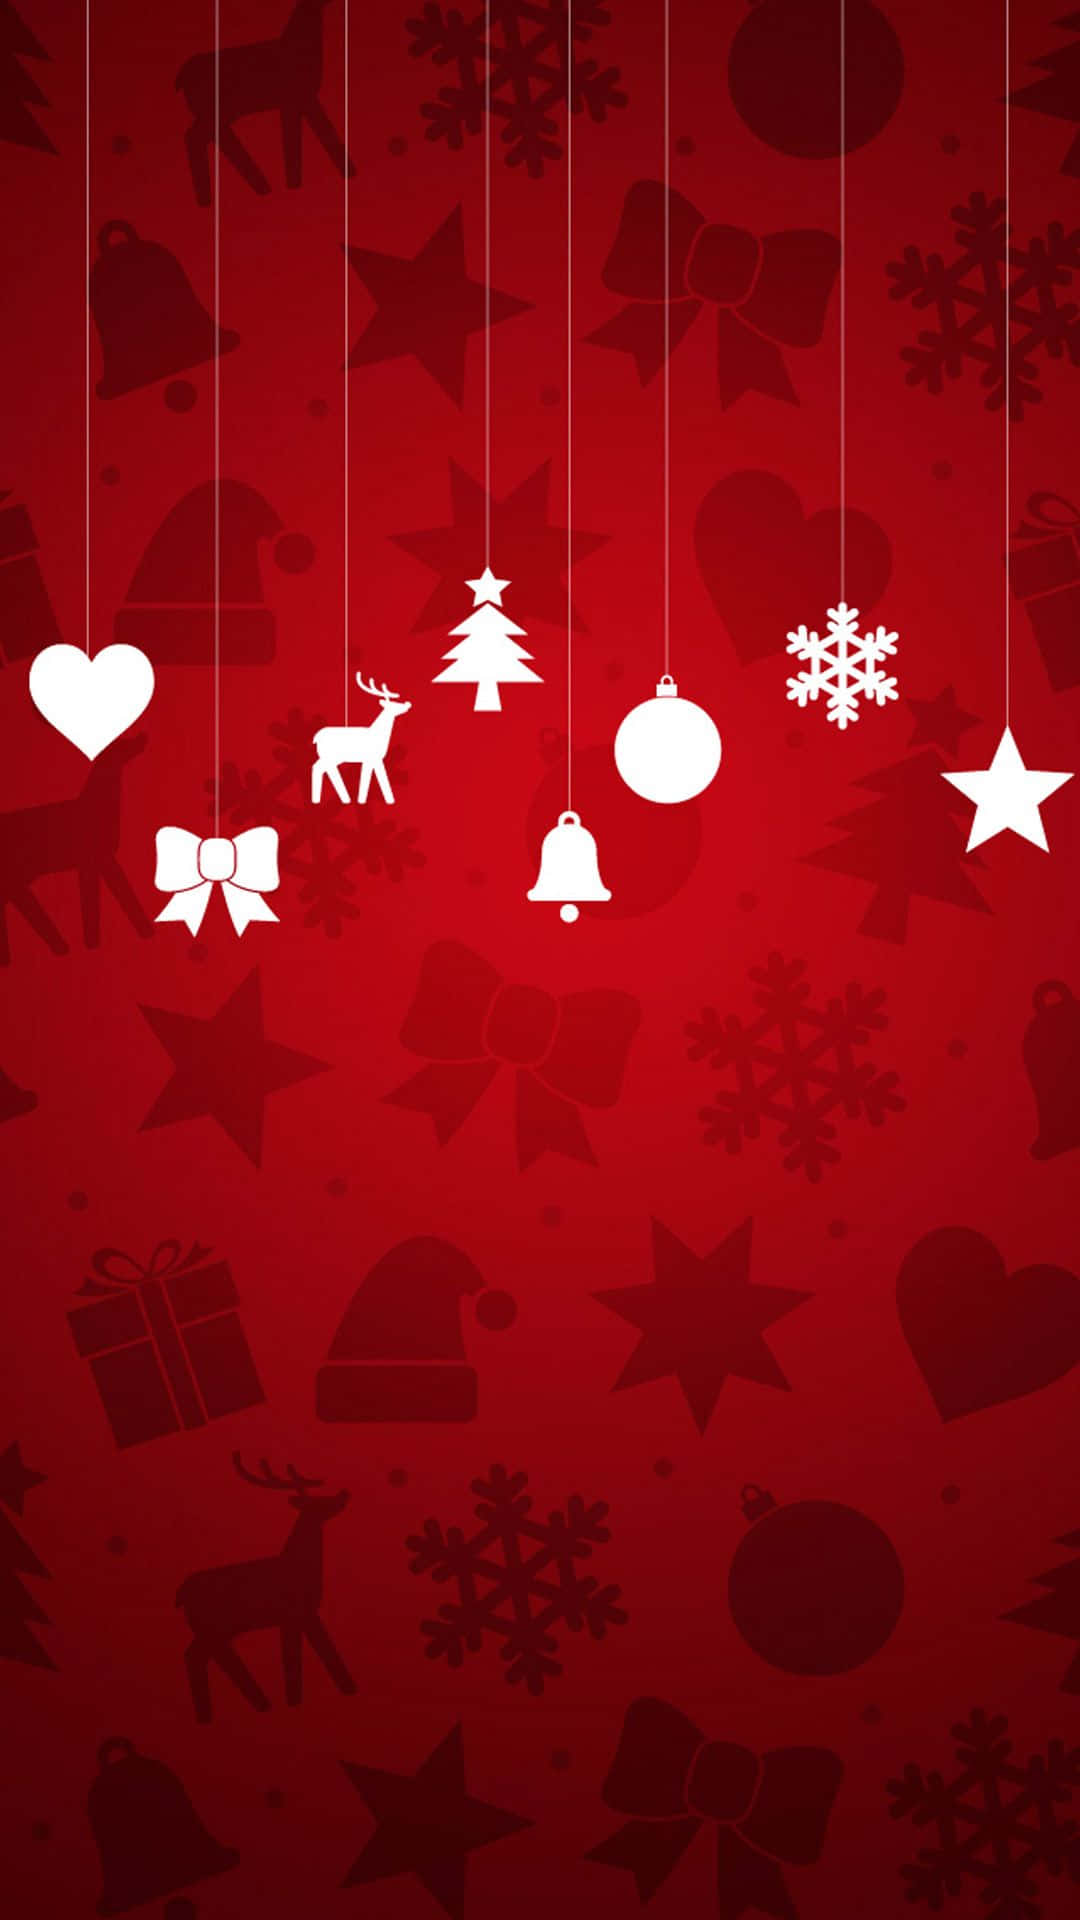 Get holiday-ready with the latest iPhone Wallpaper